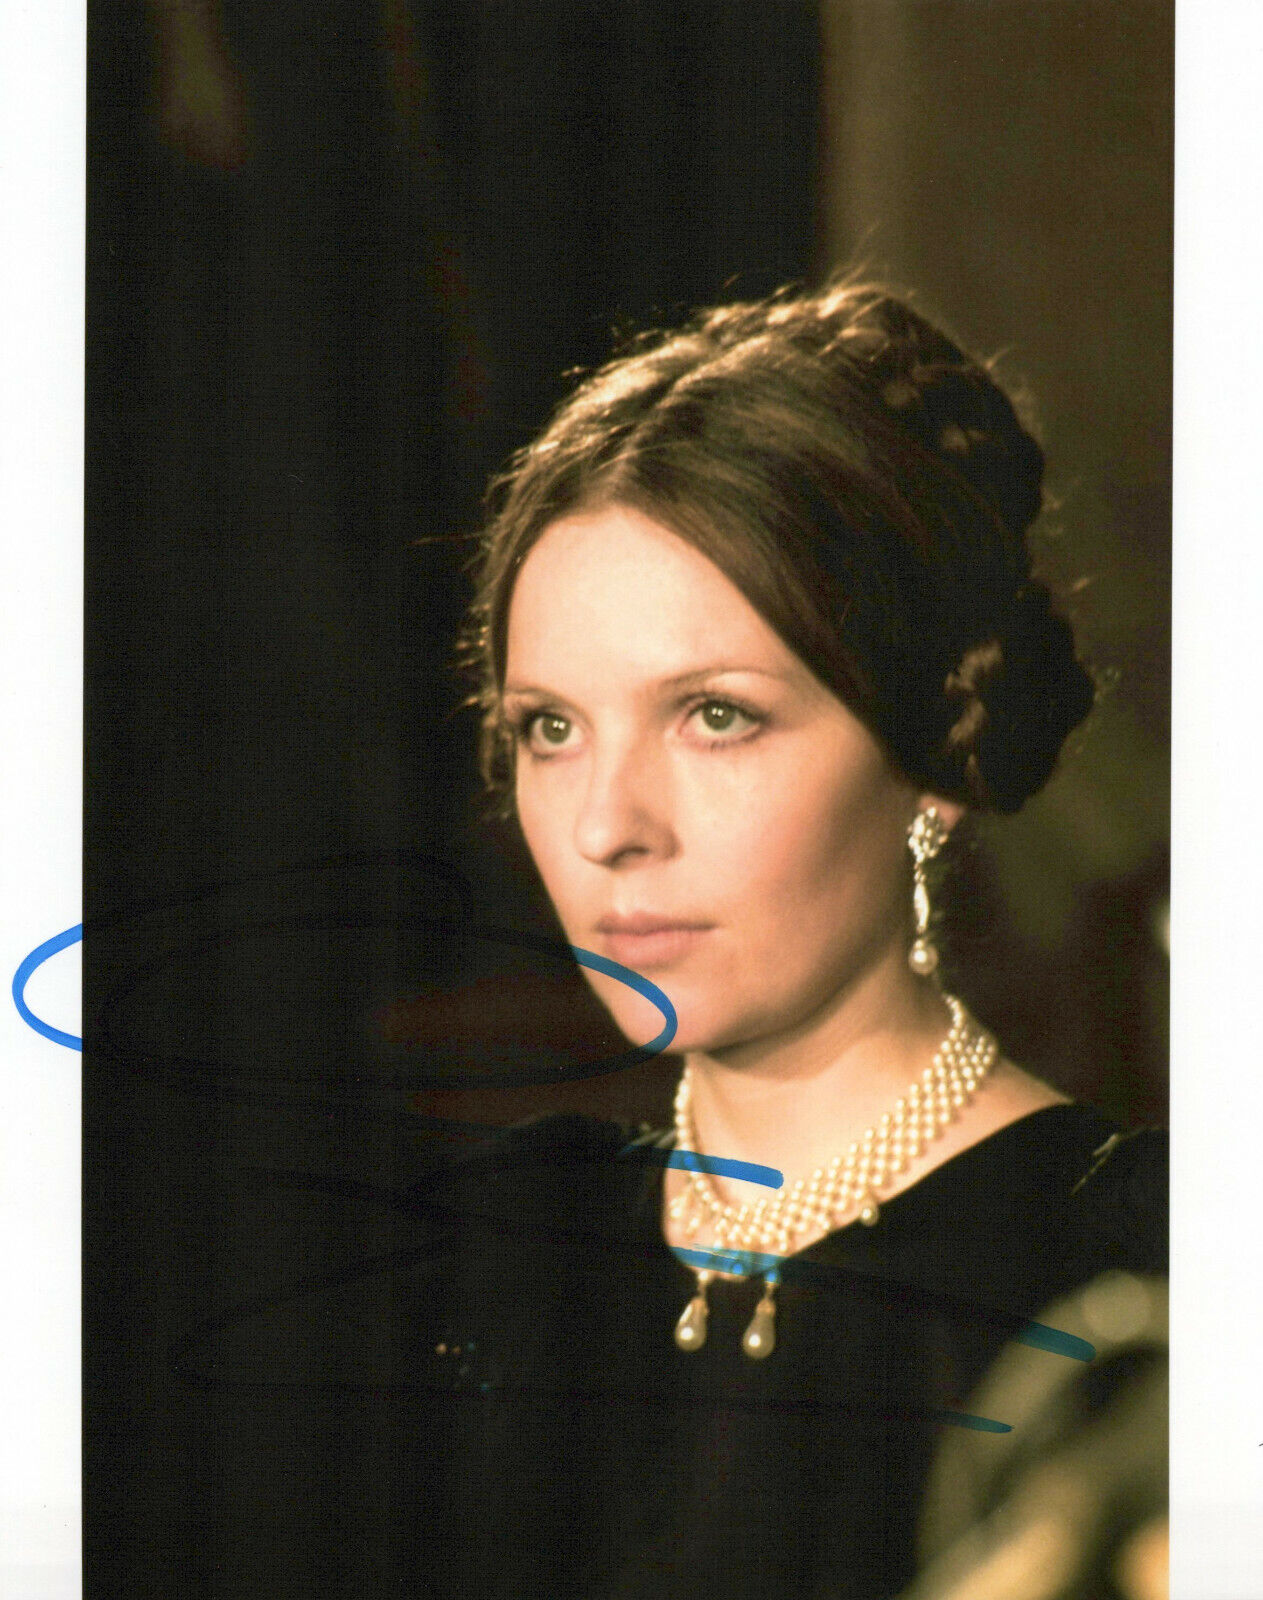 Diane Keaton The Godfather autographed Photo Poster painting signed 8x10 #1 Kay Adams